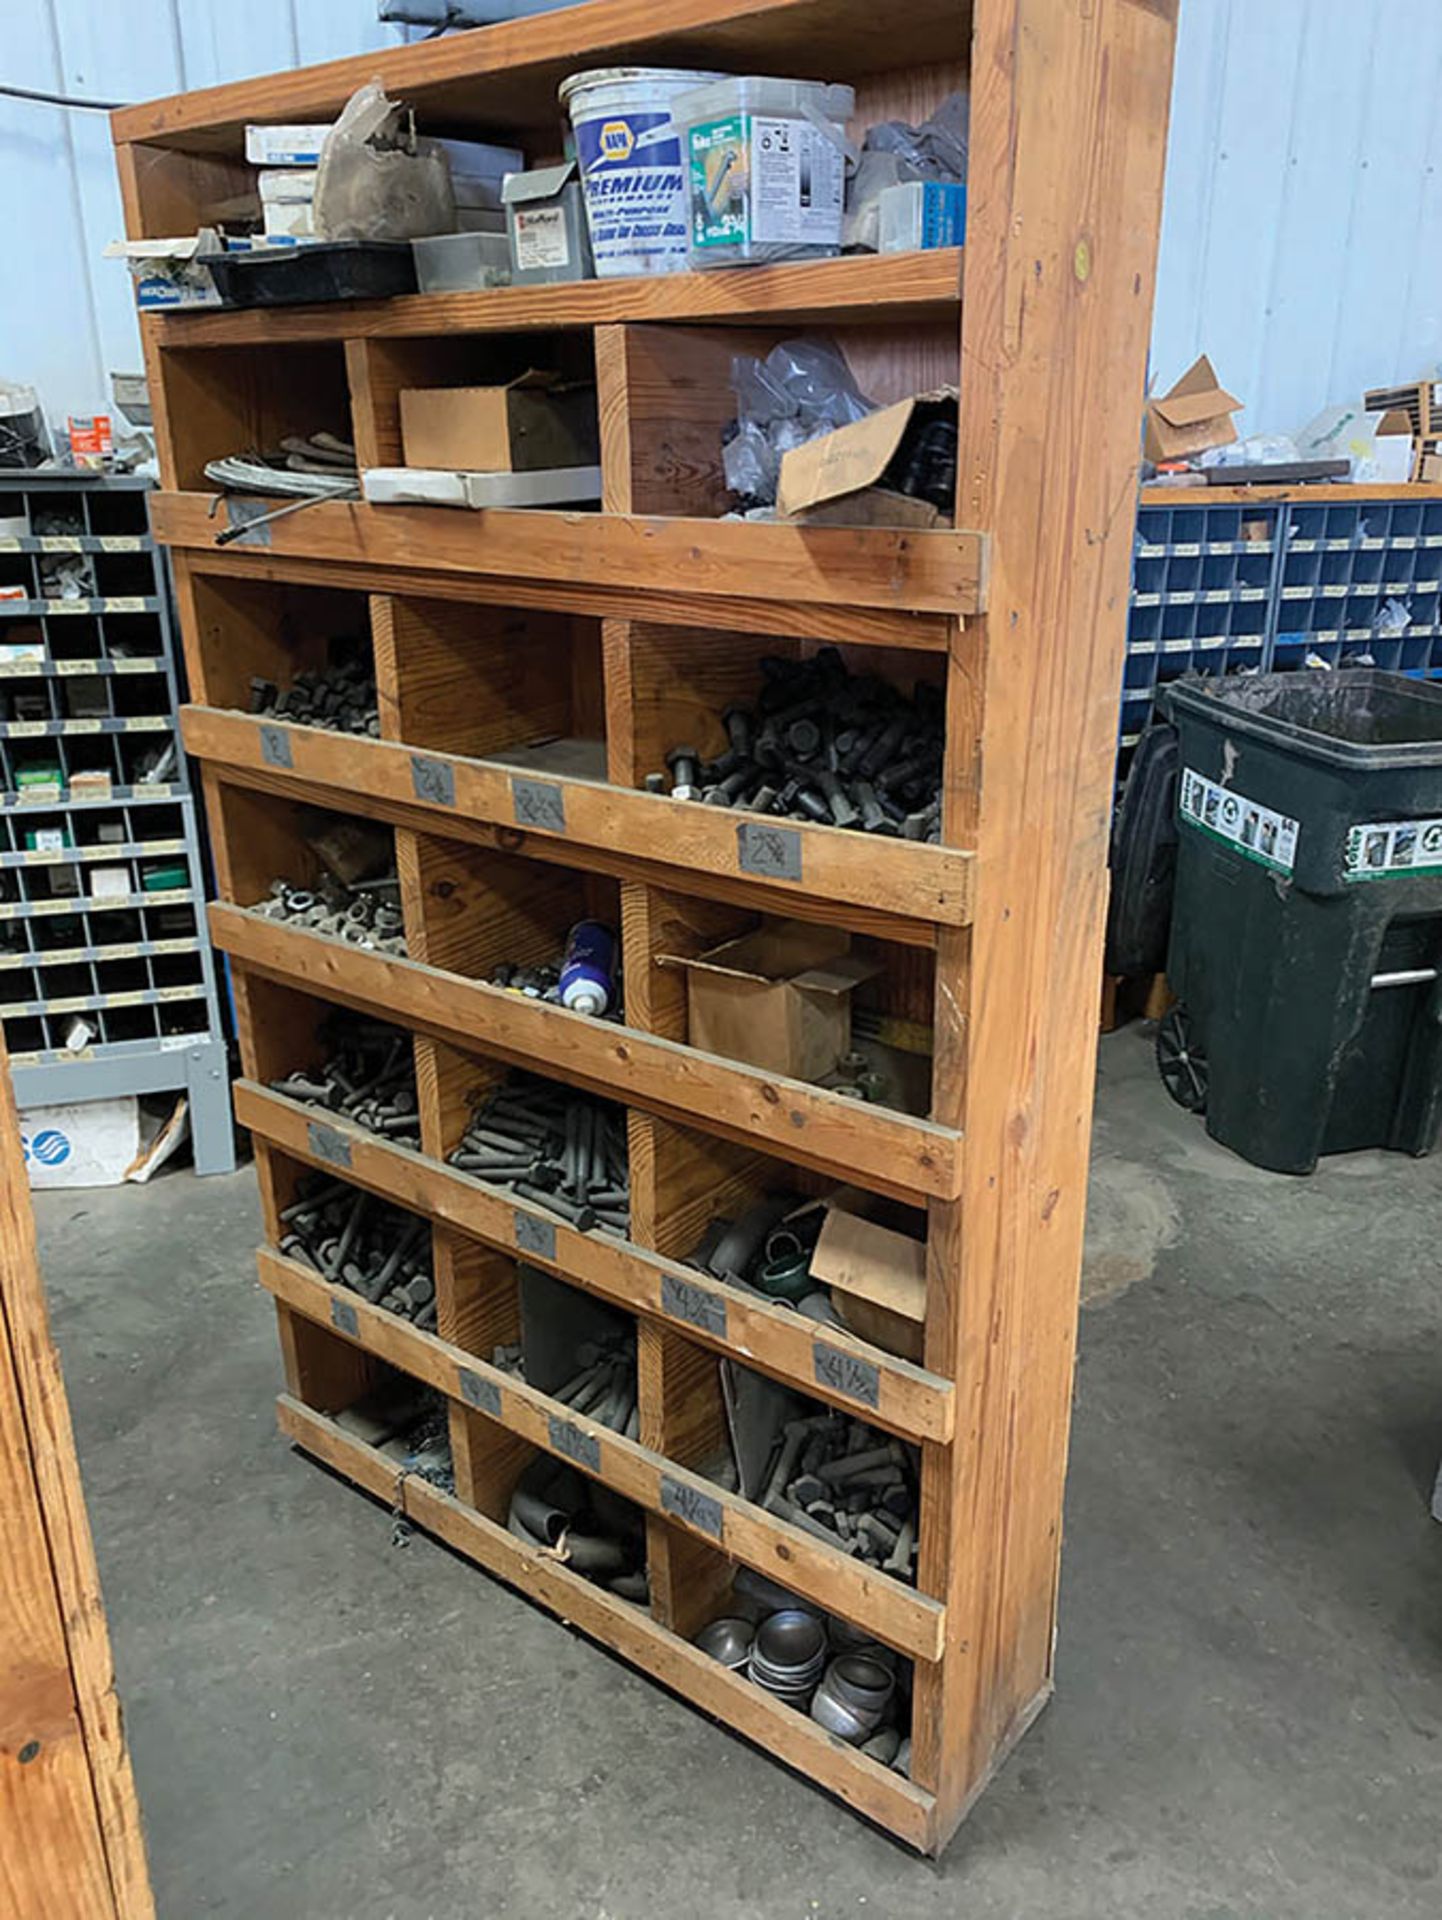 ASSORTED SHELVING AND CONTENTS OF FASTENERS, AIR FITTINGS, BEARINGS, AND PARTS - Image 2 of 5